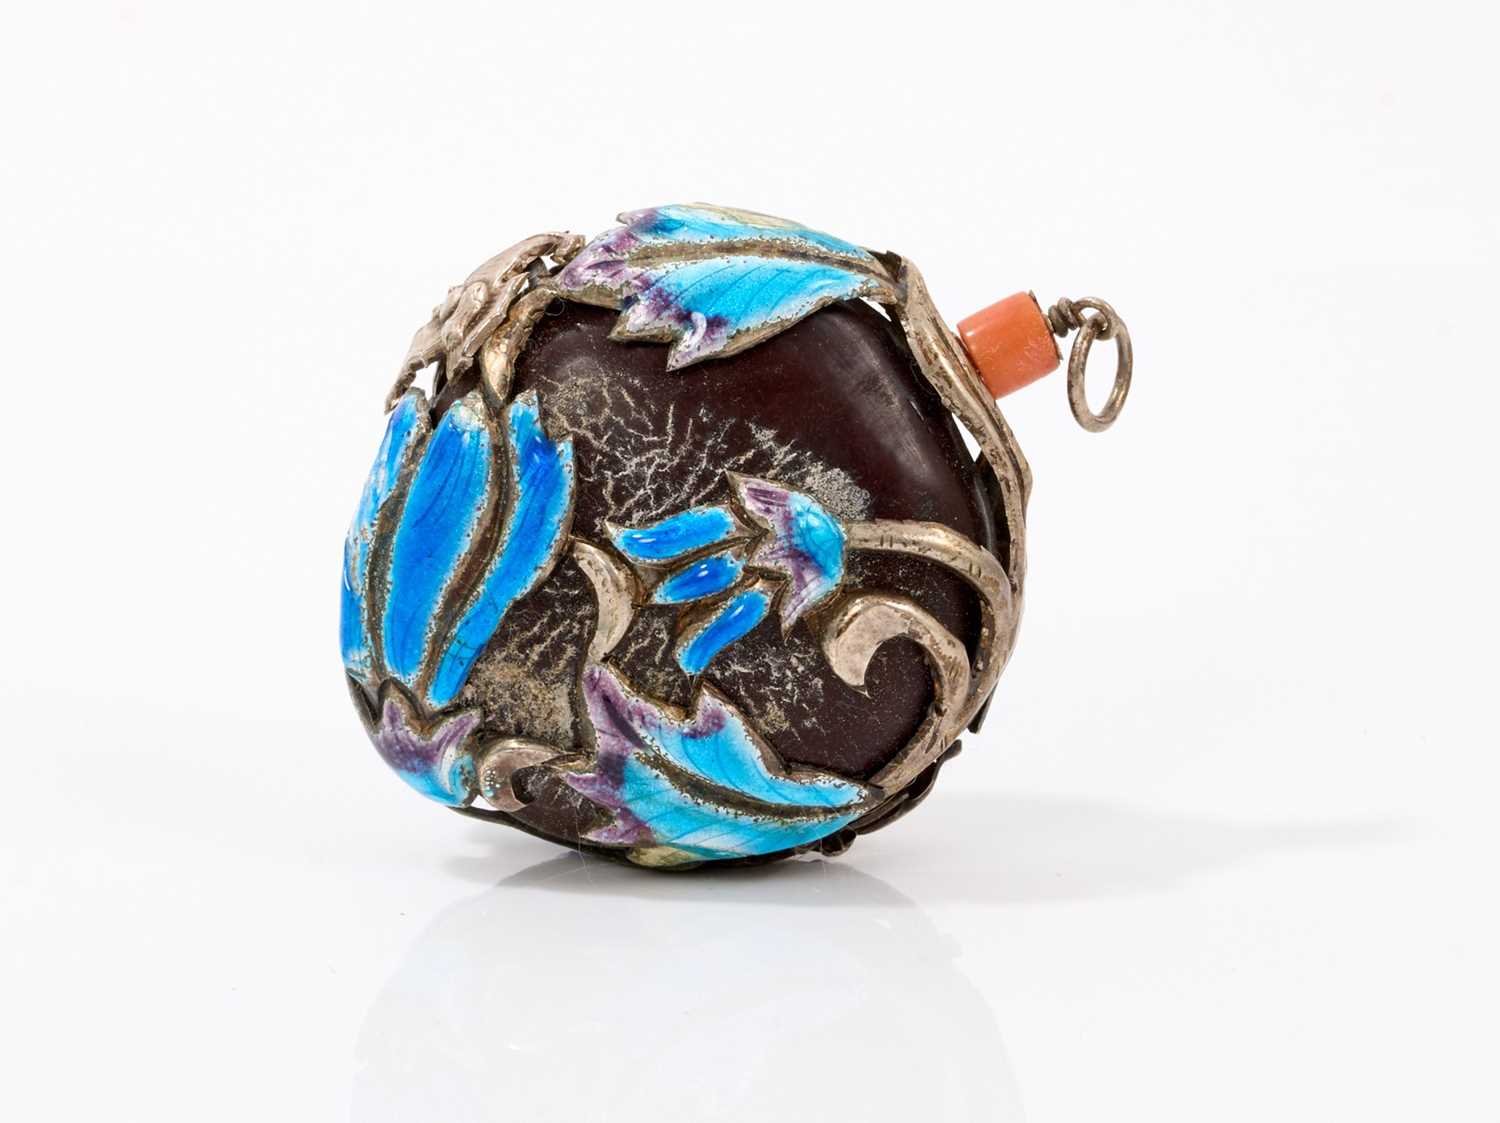 Chinese snuff with enamelled silver overlay on nut